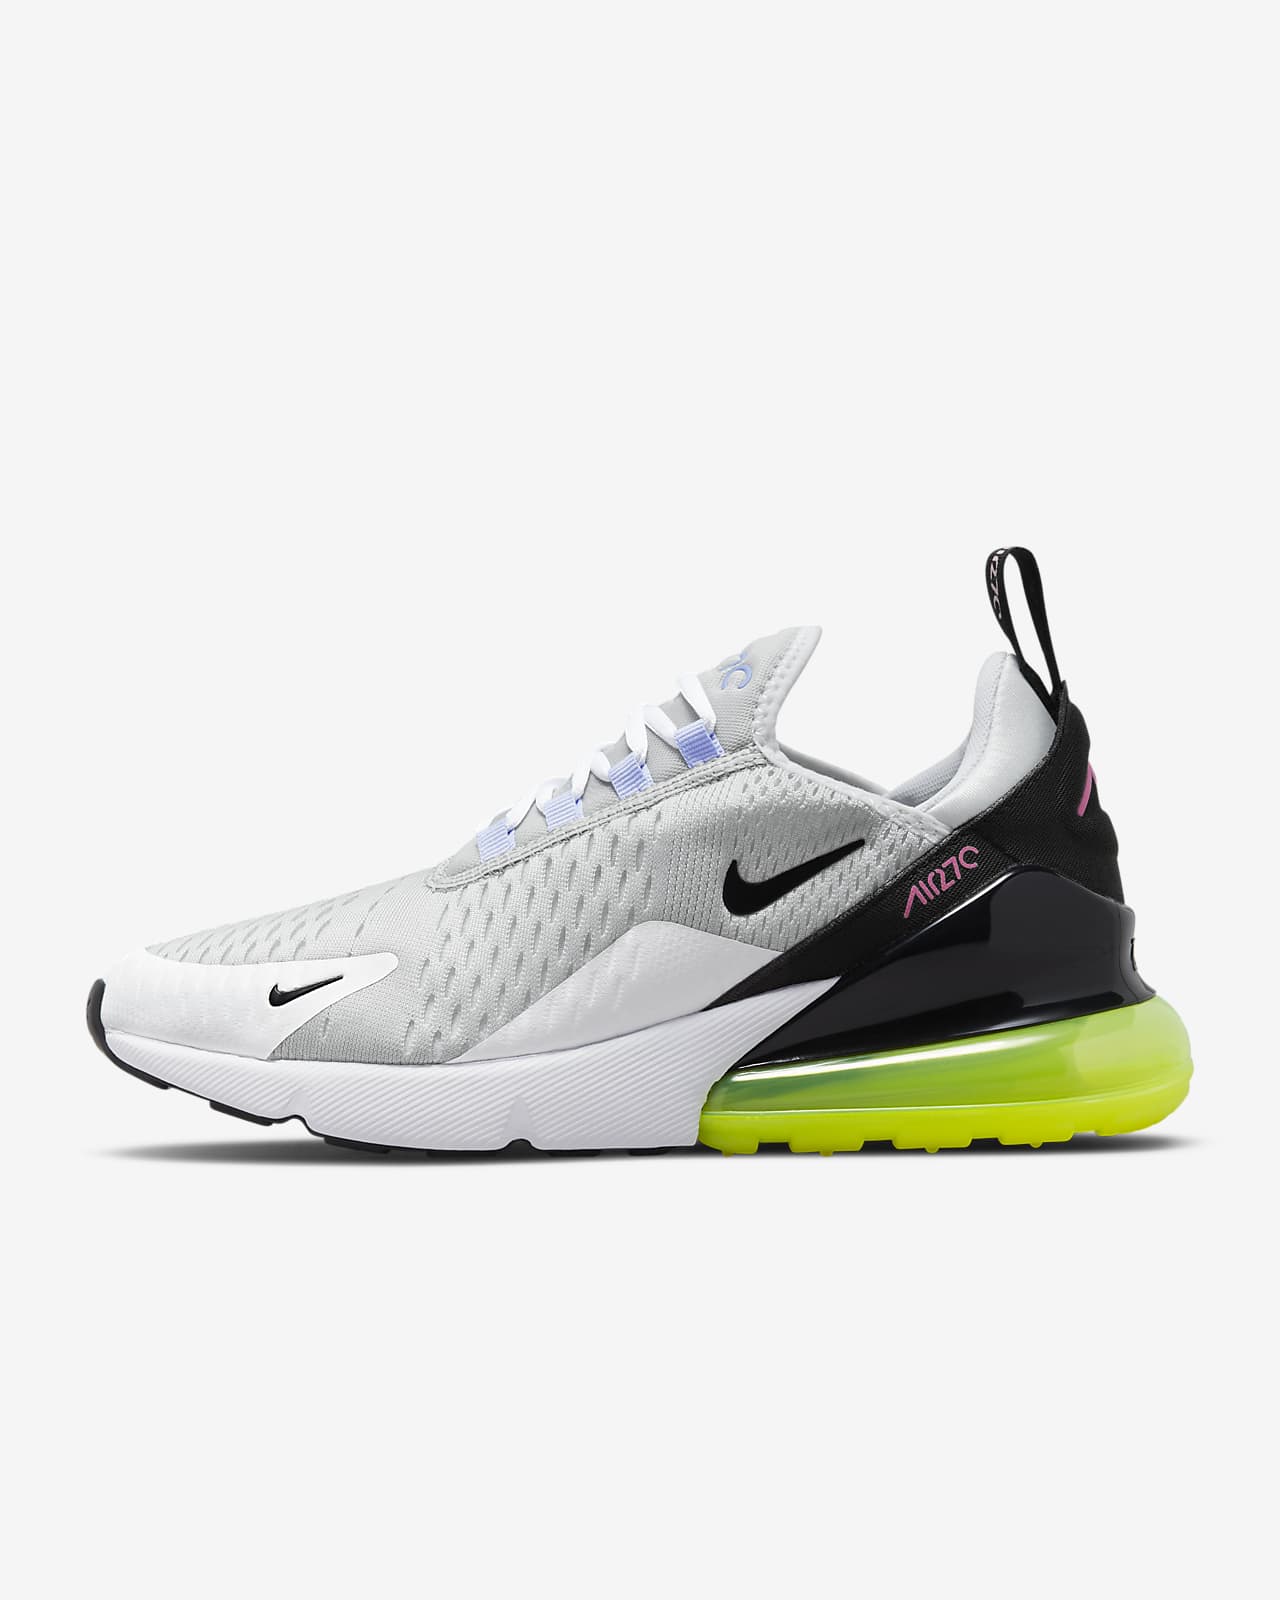 subtle Insanity Mathematician Nike Air Max 270 Women's Shoes. Nike.com